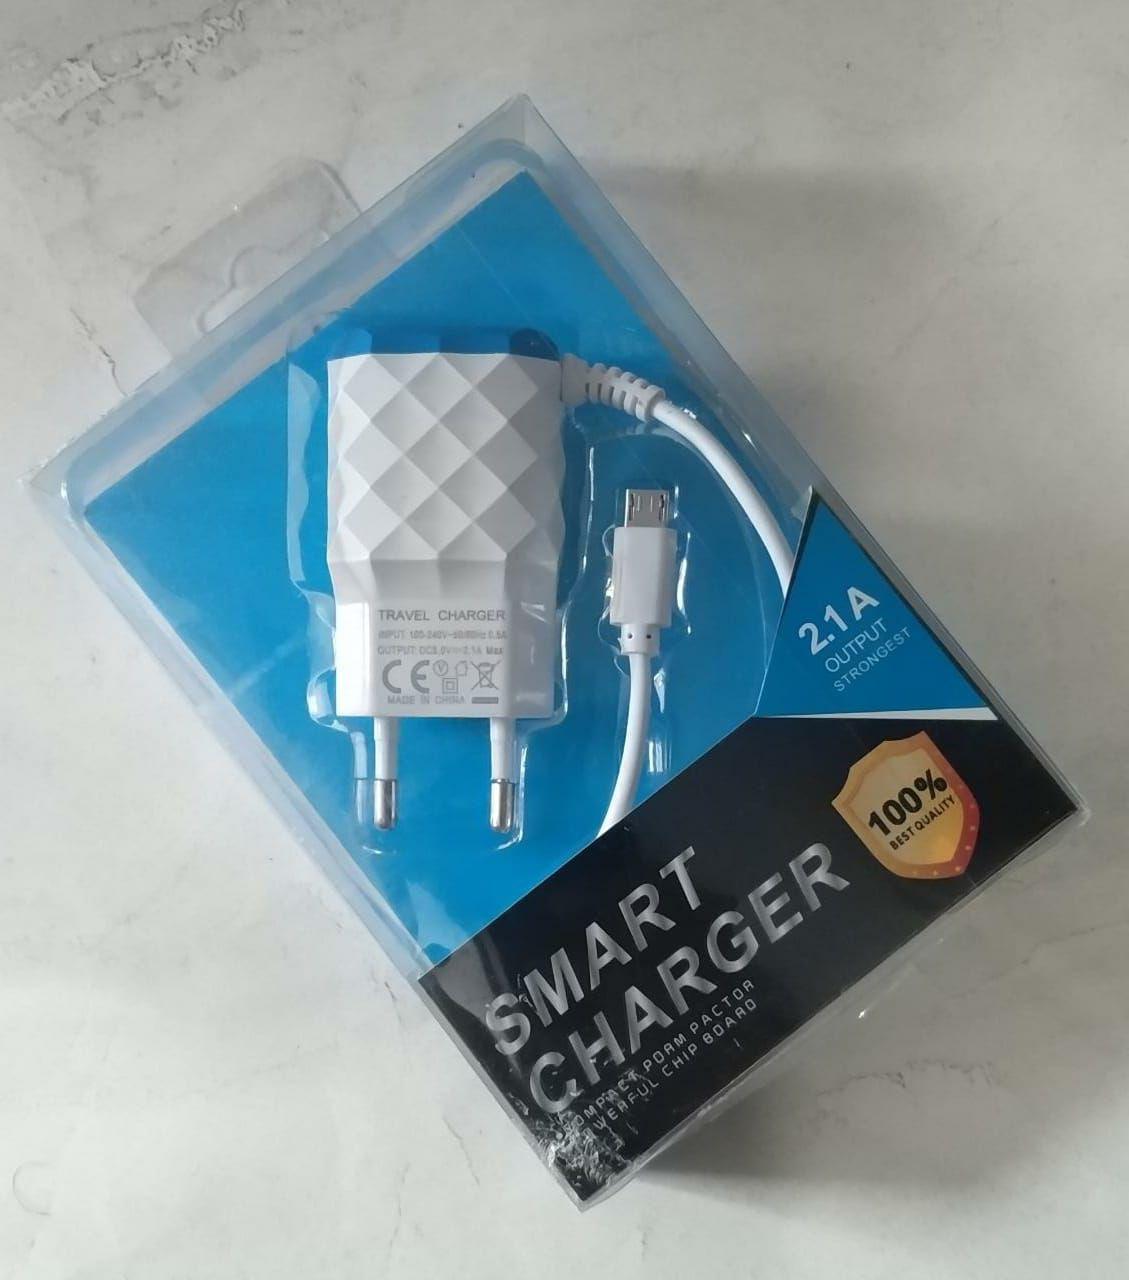 TRAVEL CHARGER DIAMOND SMART CHARGER OUTPUT 2.1A